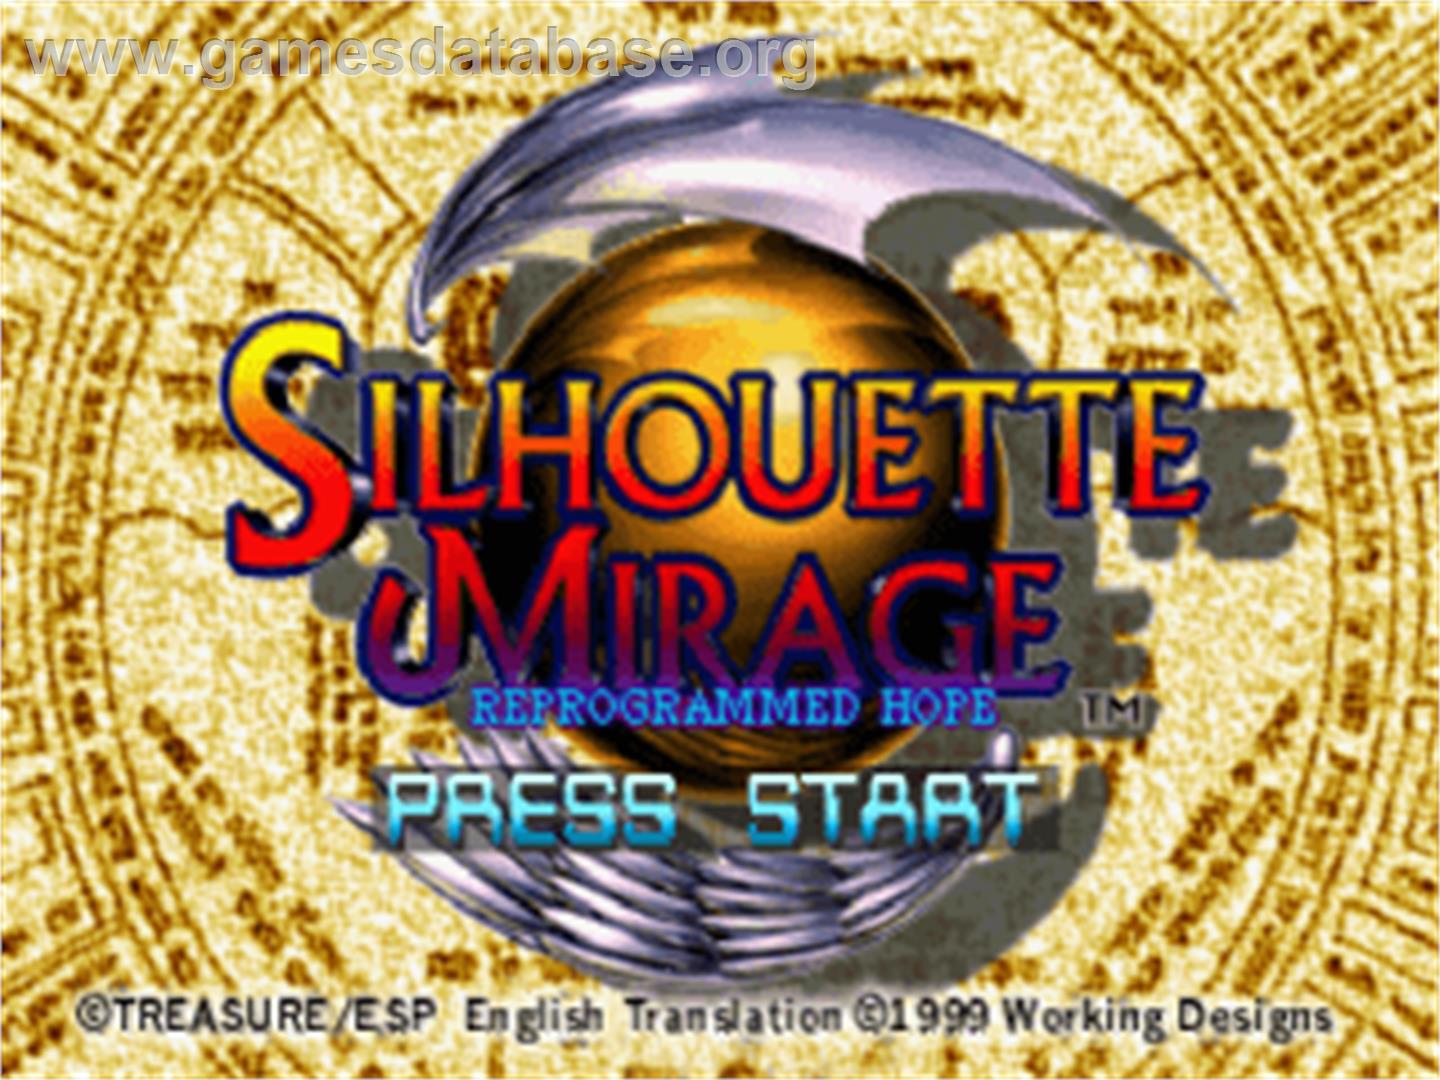 Silhouette Mirage - Sony Playstation - Artwork - Title Screen